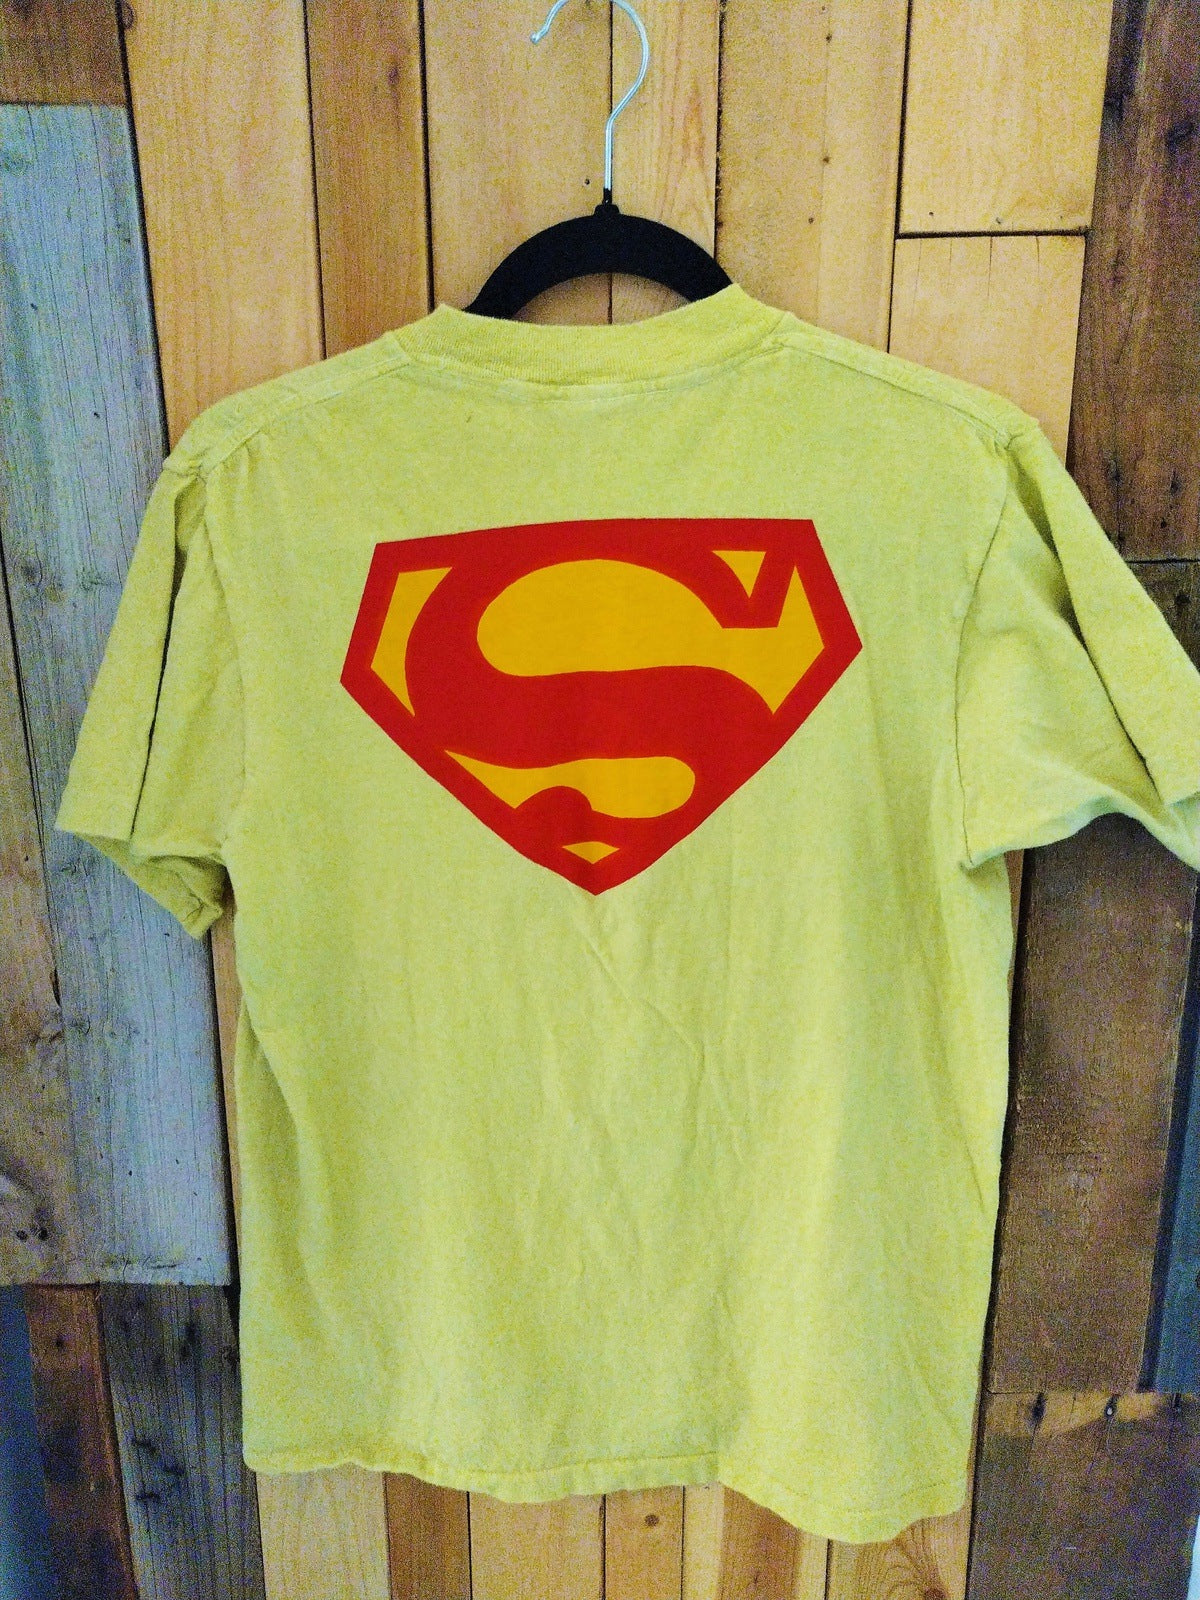 Vintage 1970's "Superman" Tee Shirt Size Small By "What's New"